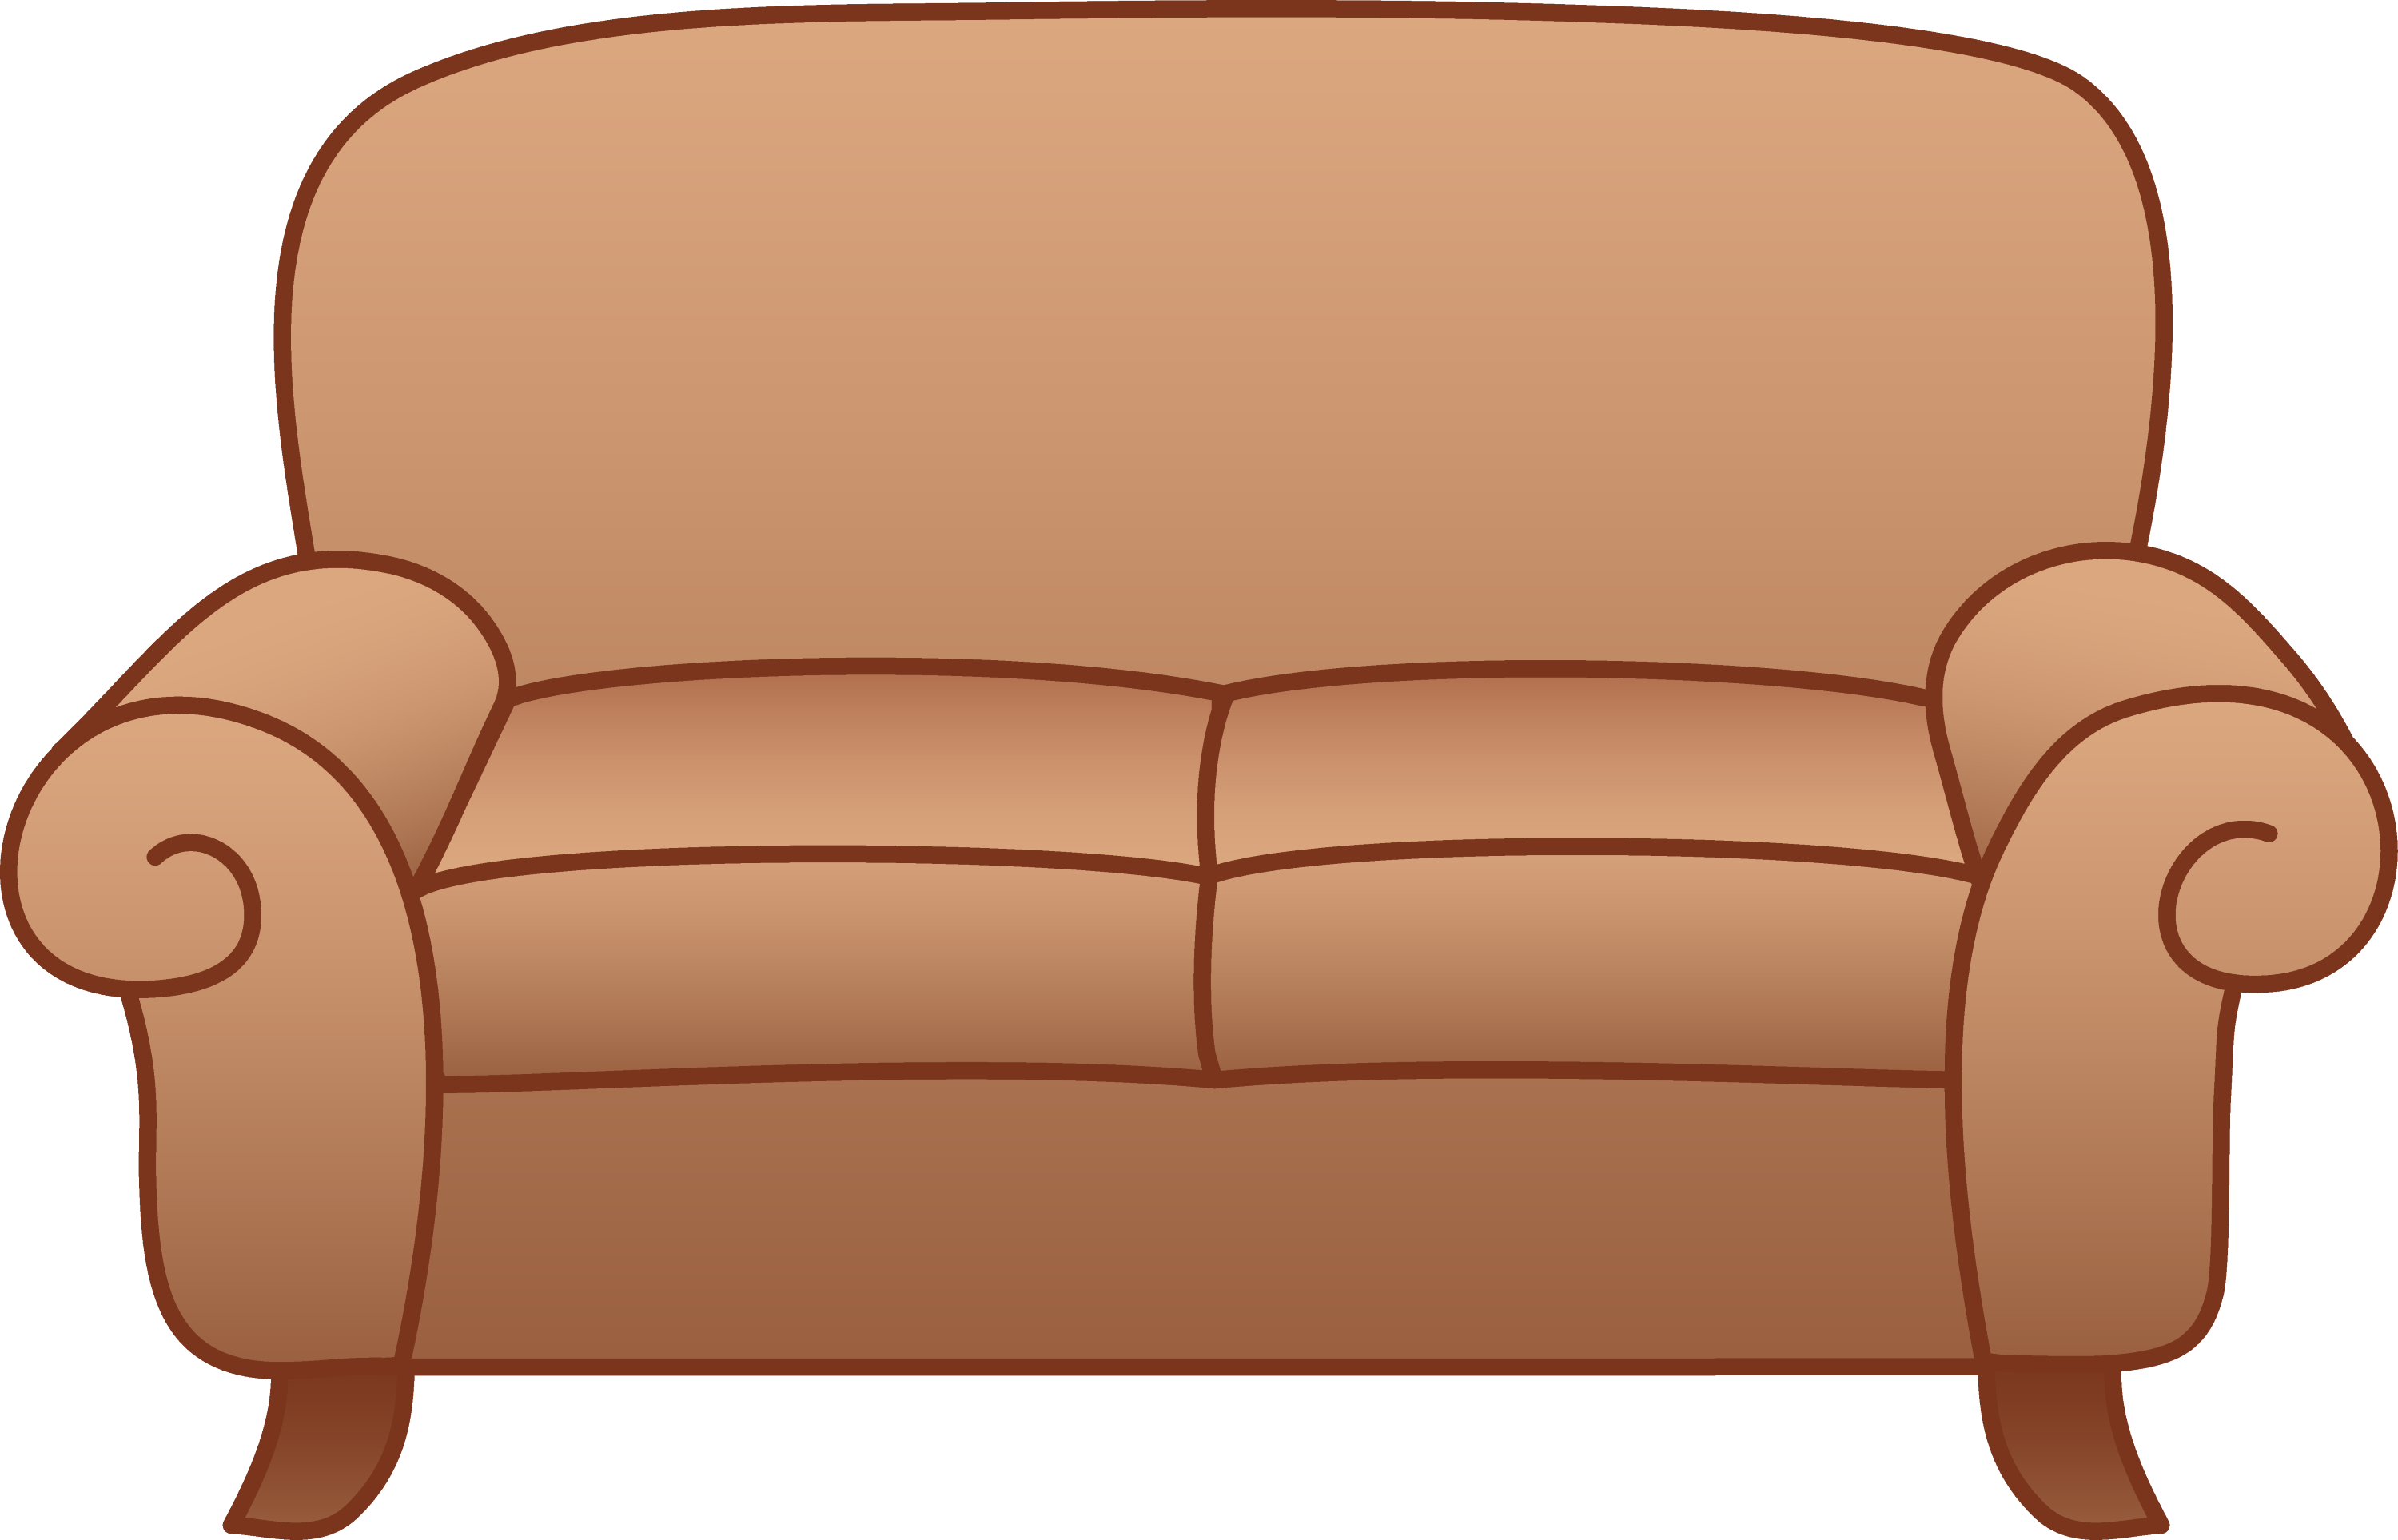 furnitures clipart - photo #25